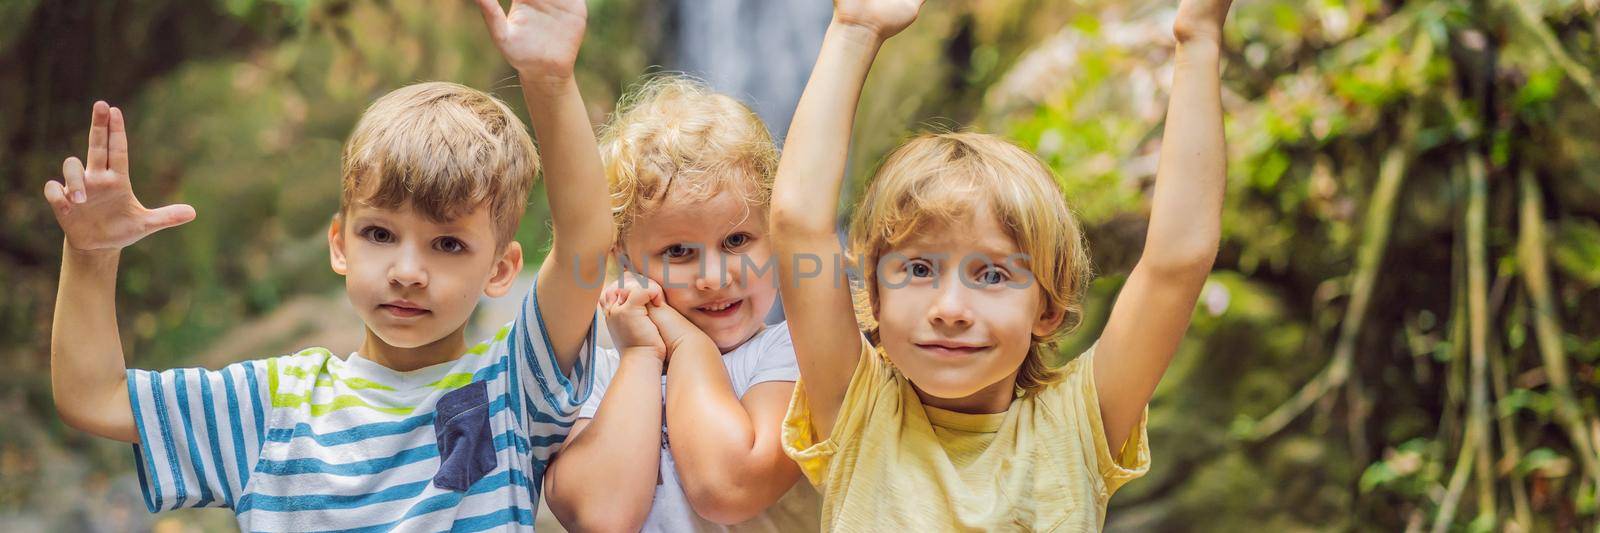 Children rest during a hike in the woods. BANNER, LONG FORMAT